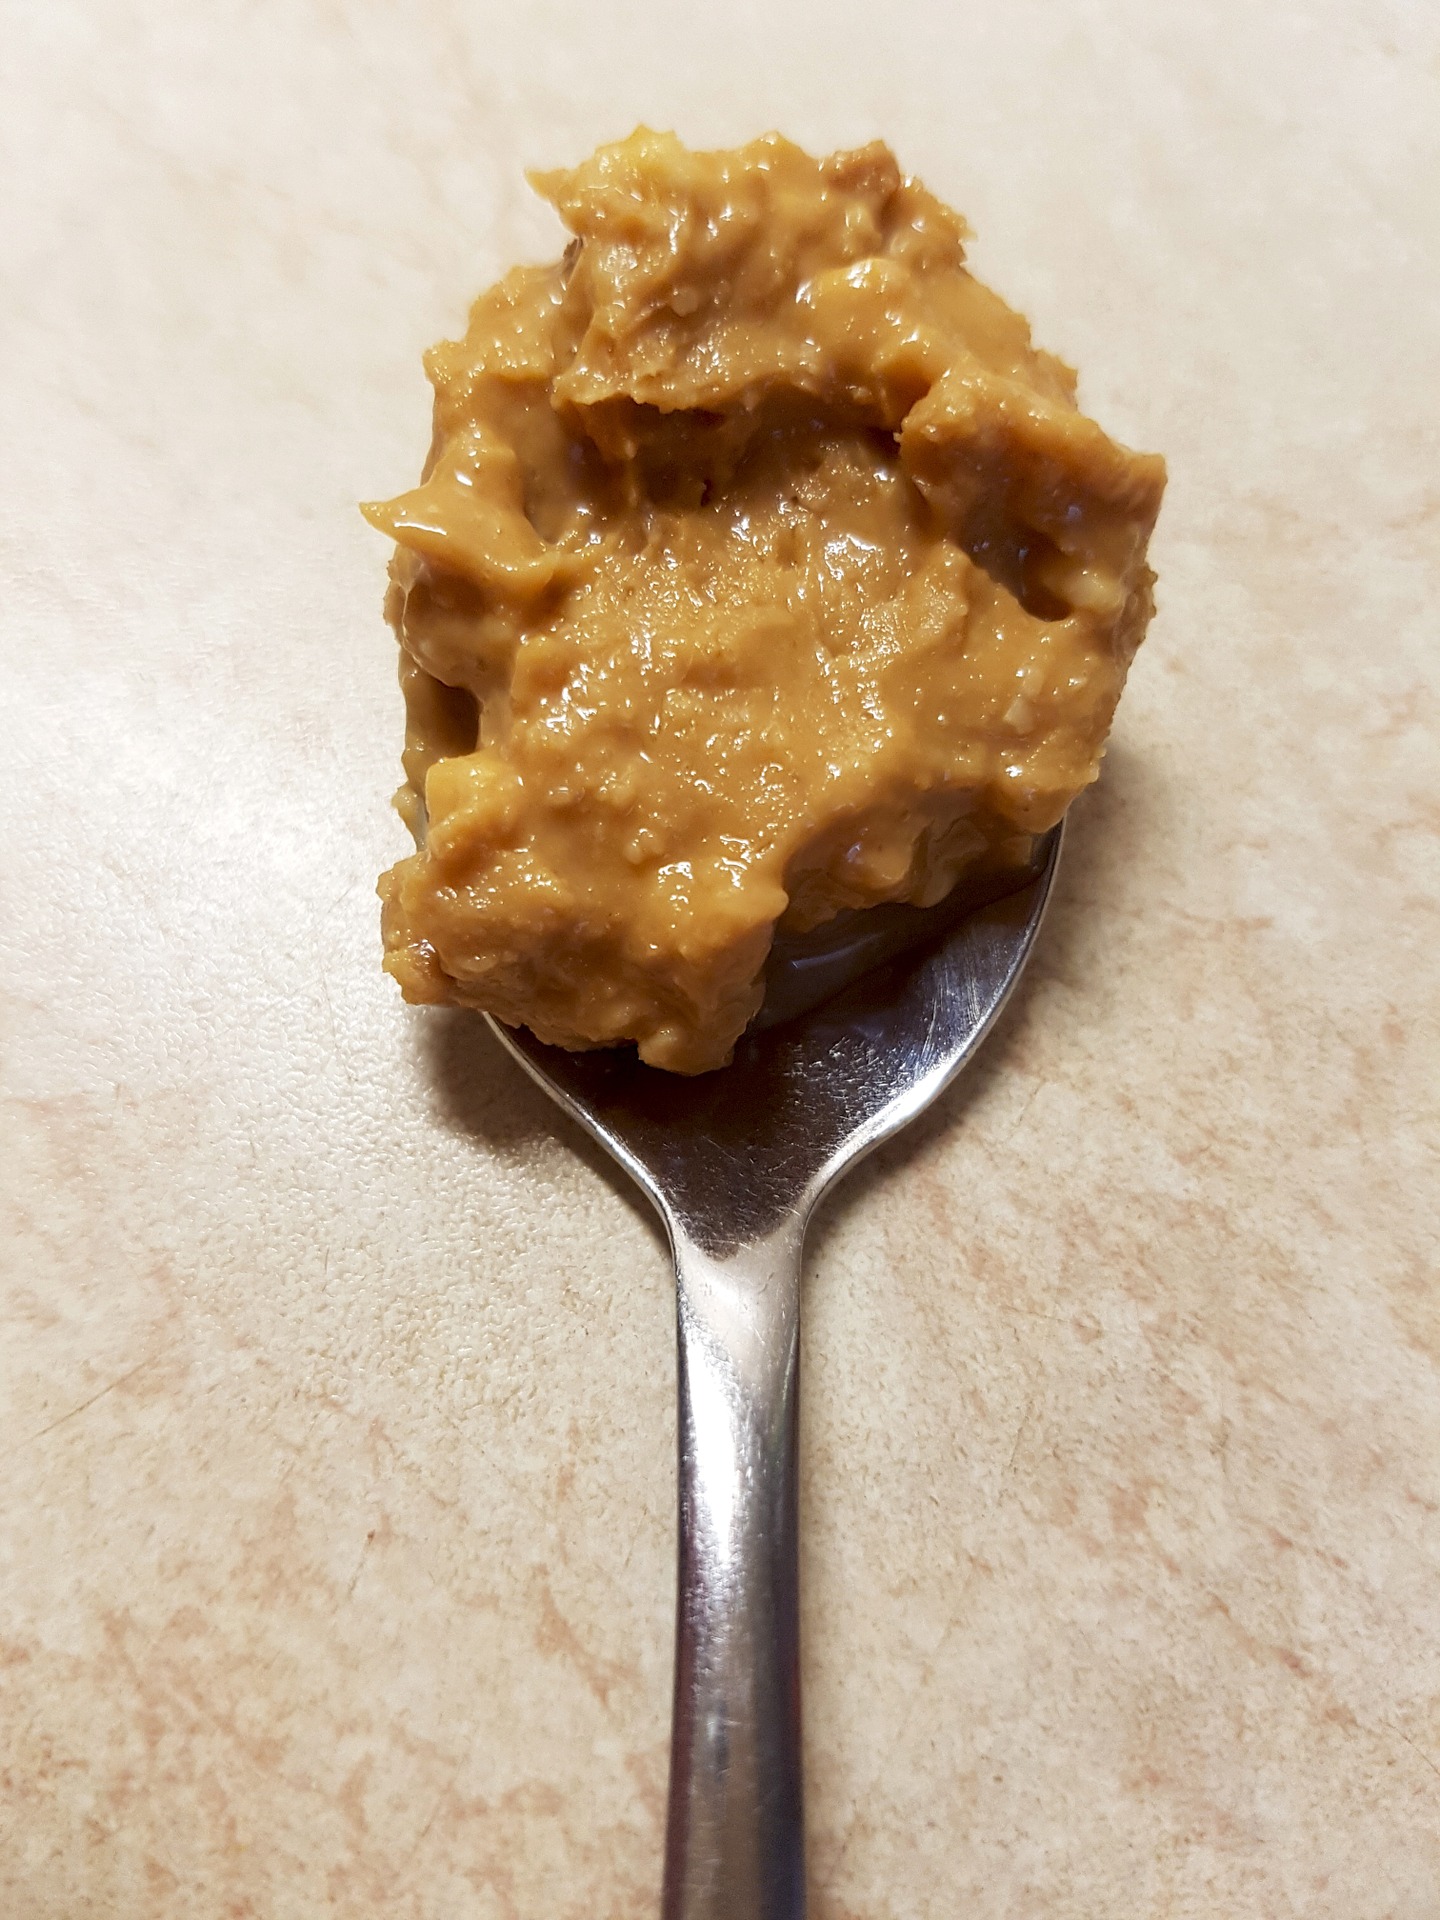 best kind of peanut butter for dogs